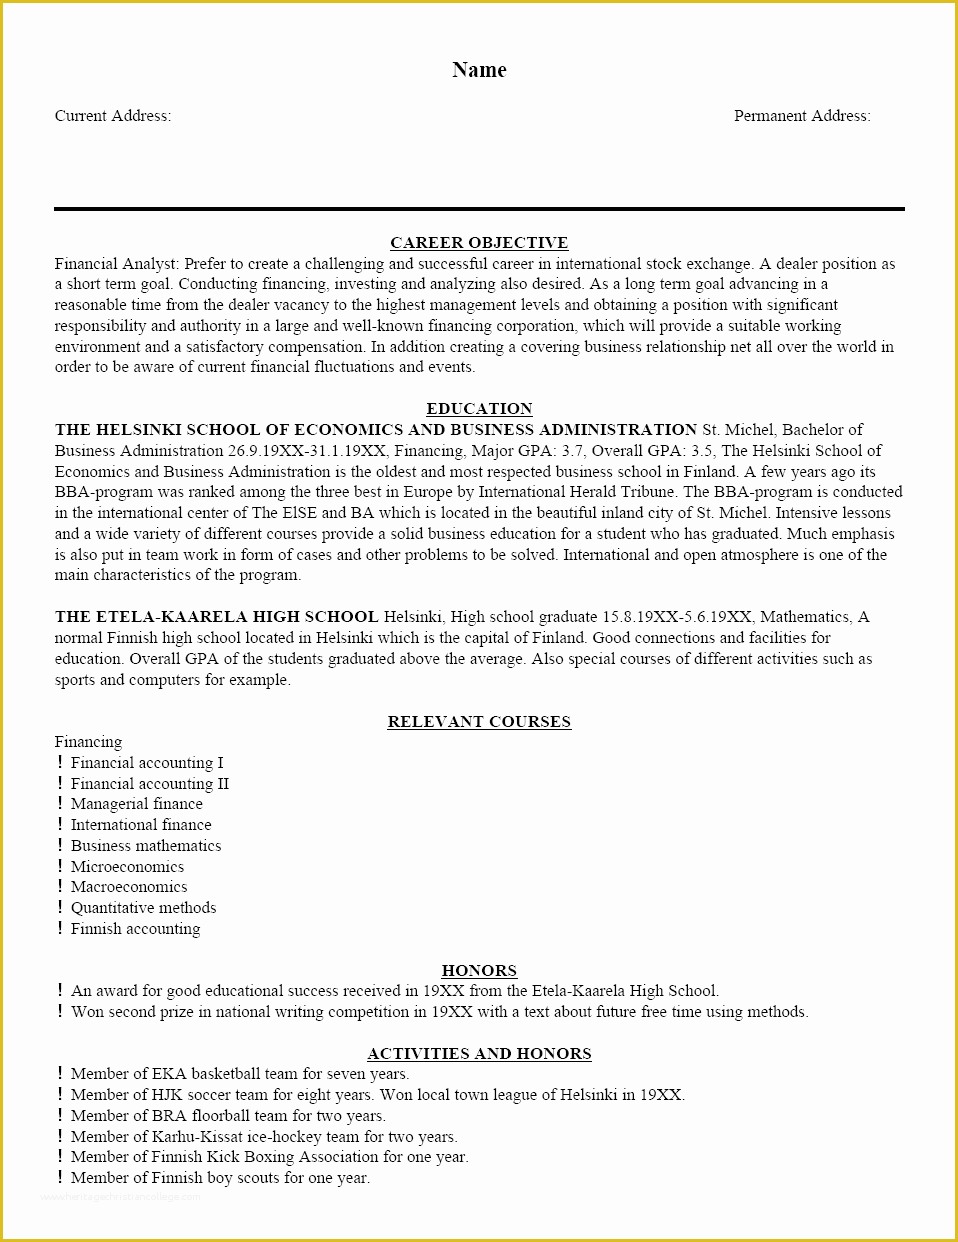 Free Sample Resume Templates Of Free Sample Resume Template Cover Letter and Resume